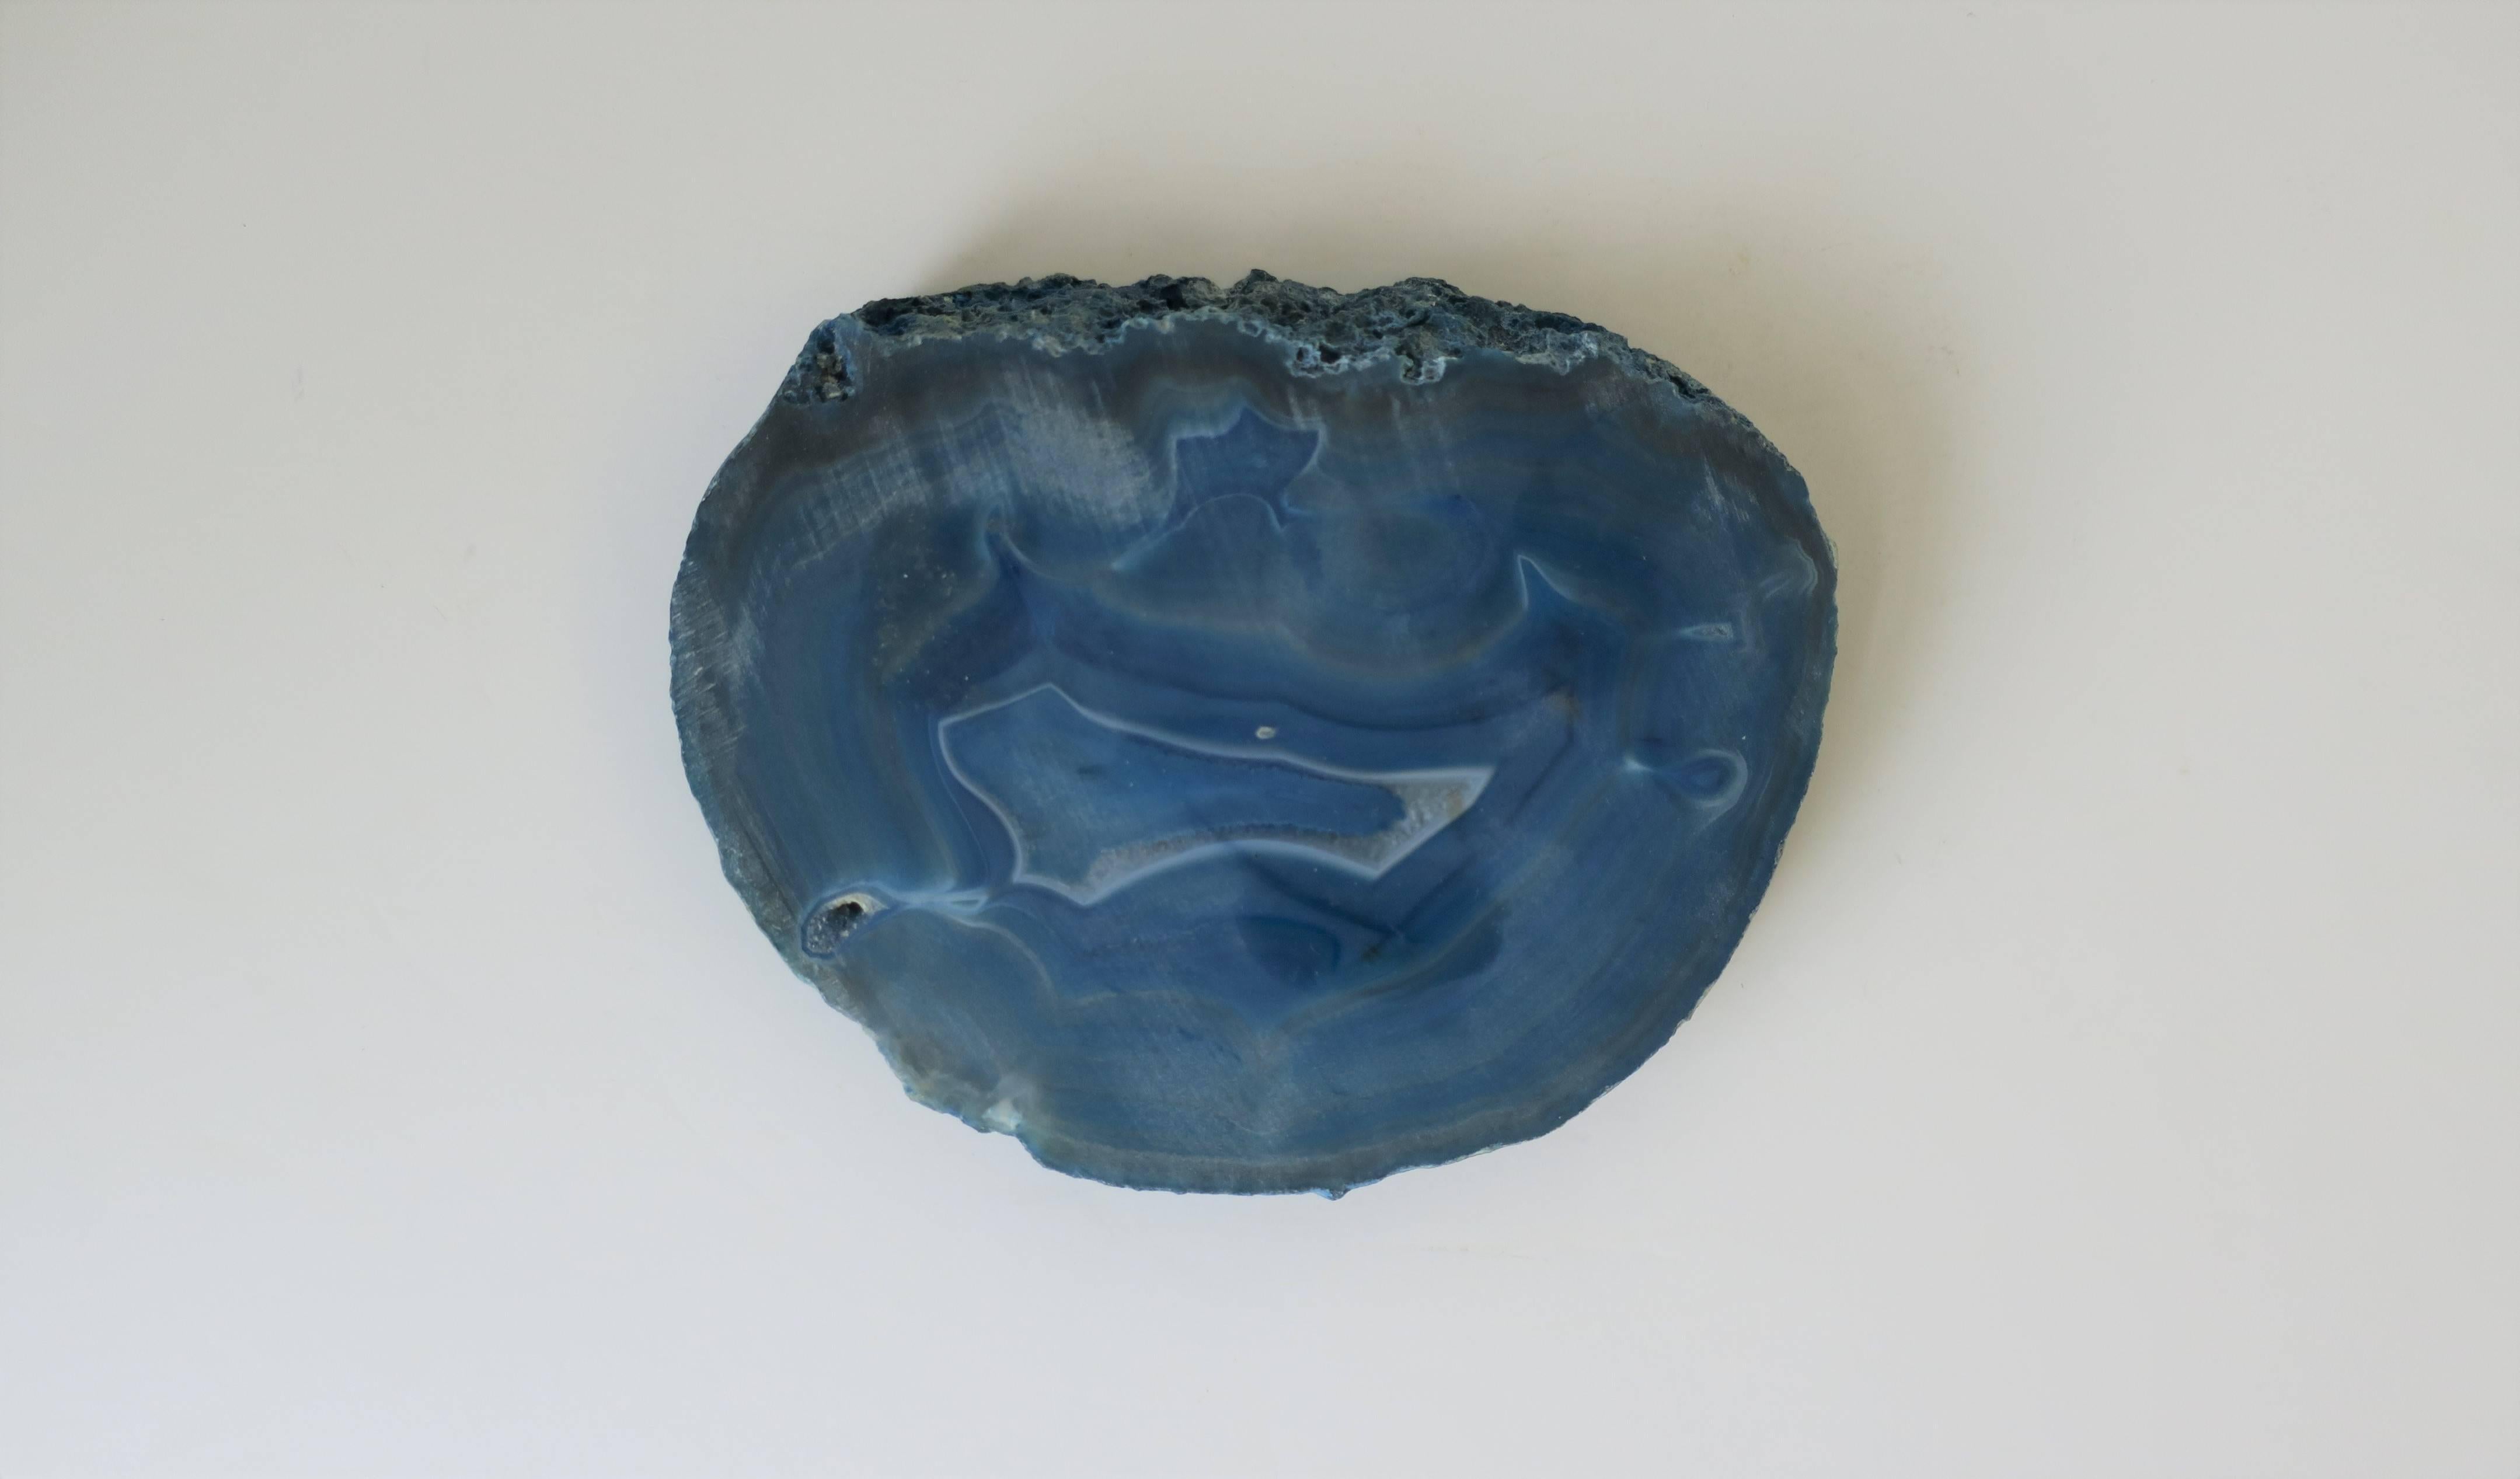 Blue and White Agate Onyx Jewelry Dish or Decorative Object 4